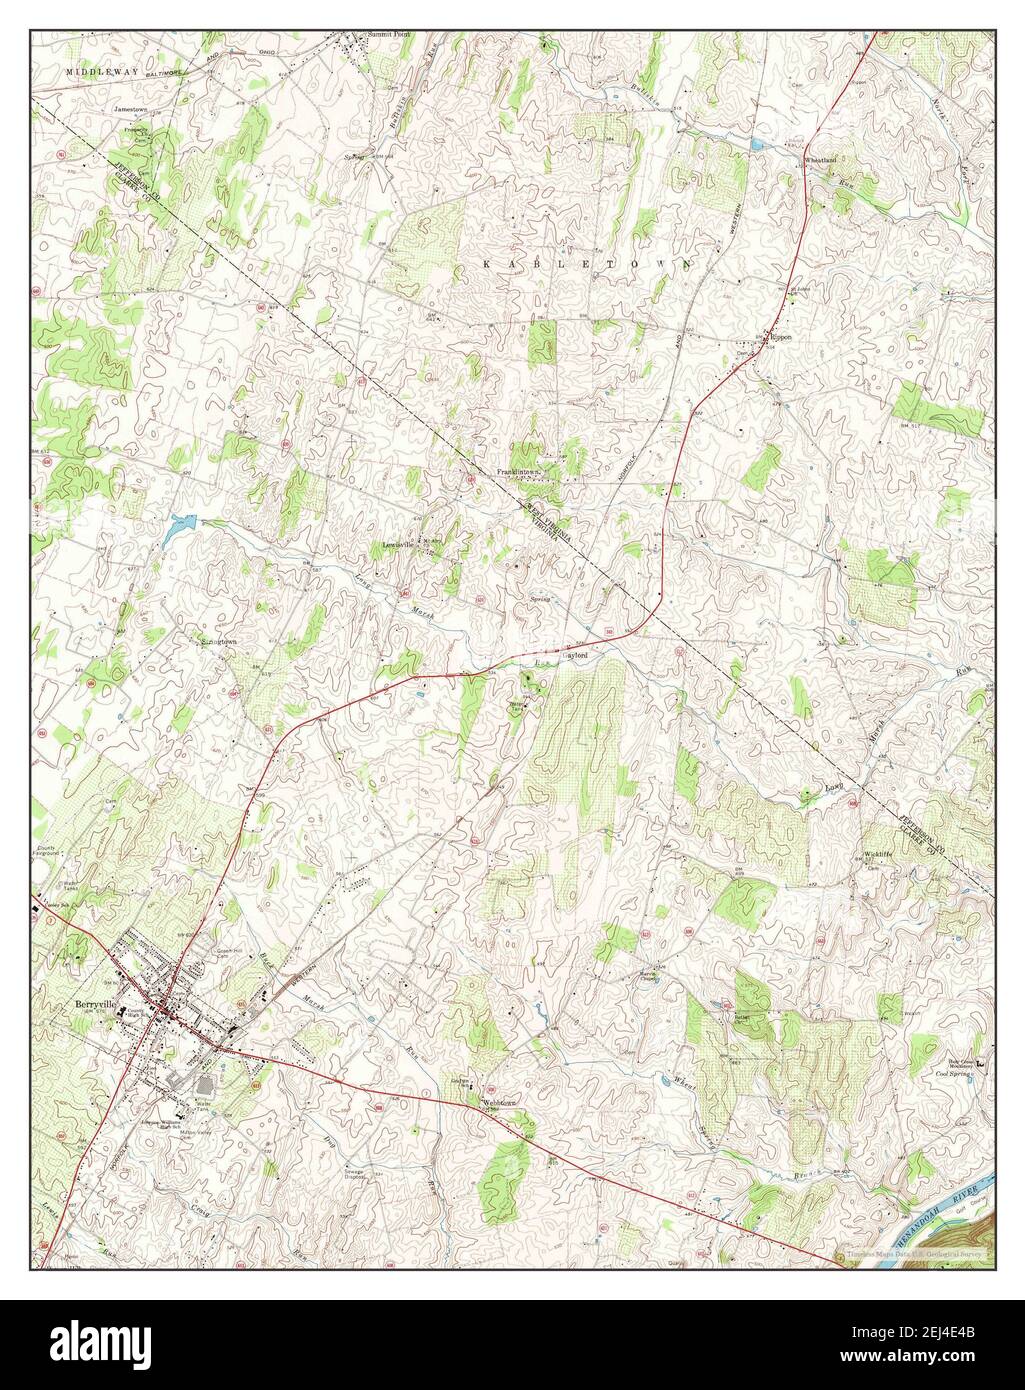 Berryville, Virginia, map 1968, 1:24000, United States of America by Timeless Maps, data U.S. Geological Survey Stock Photo